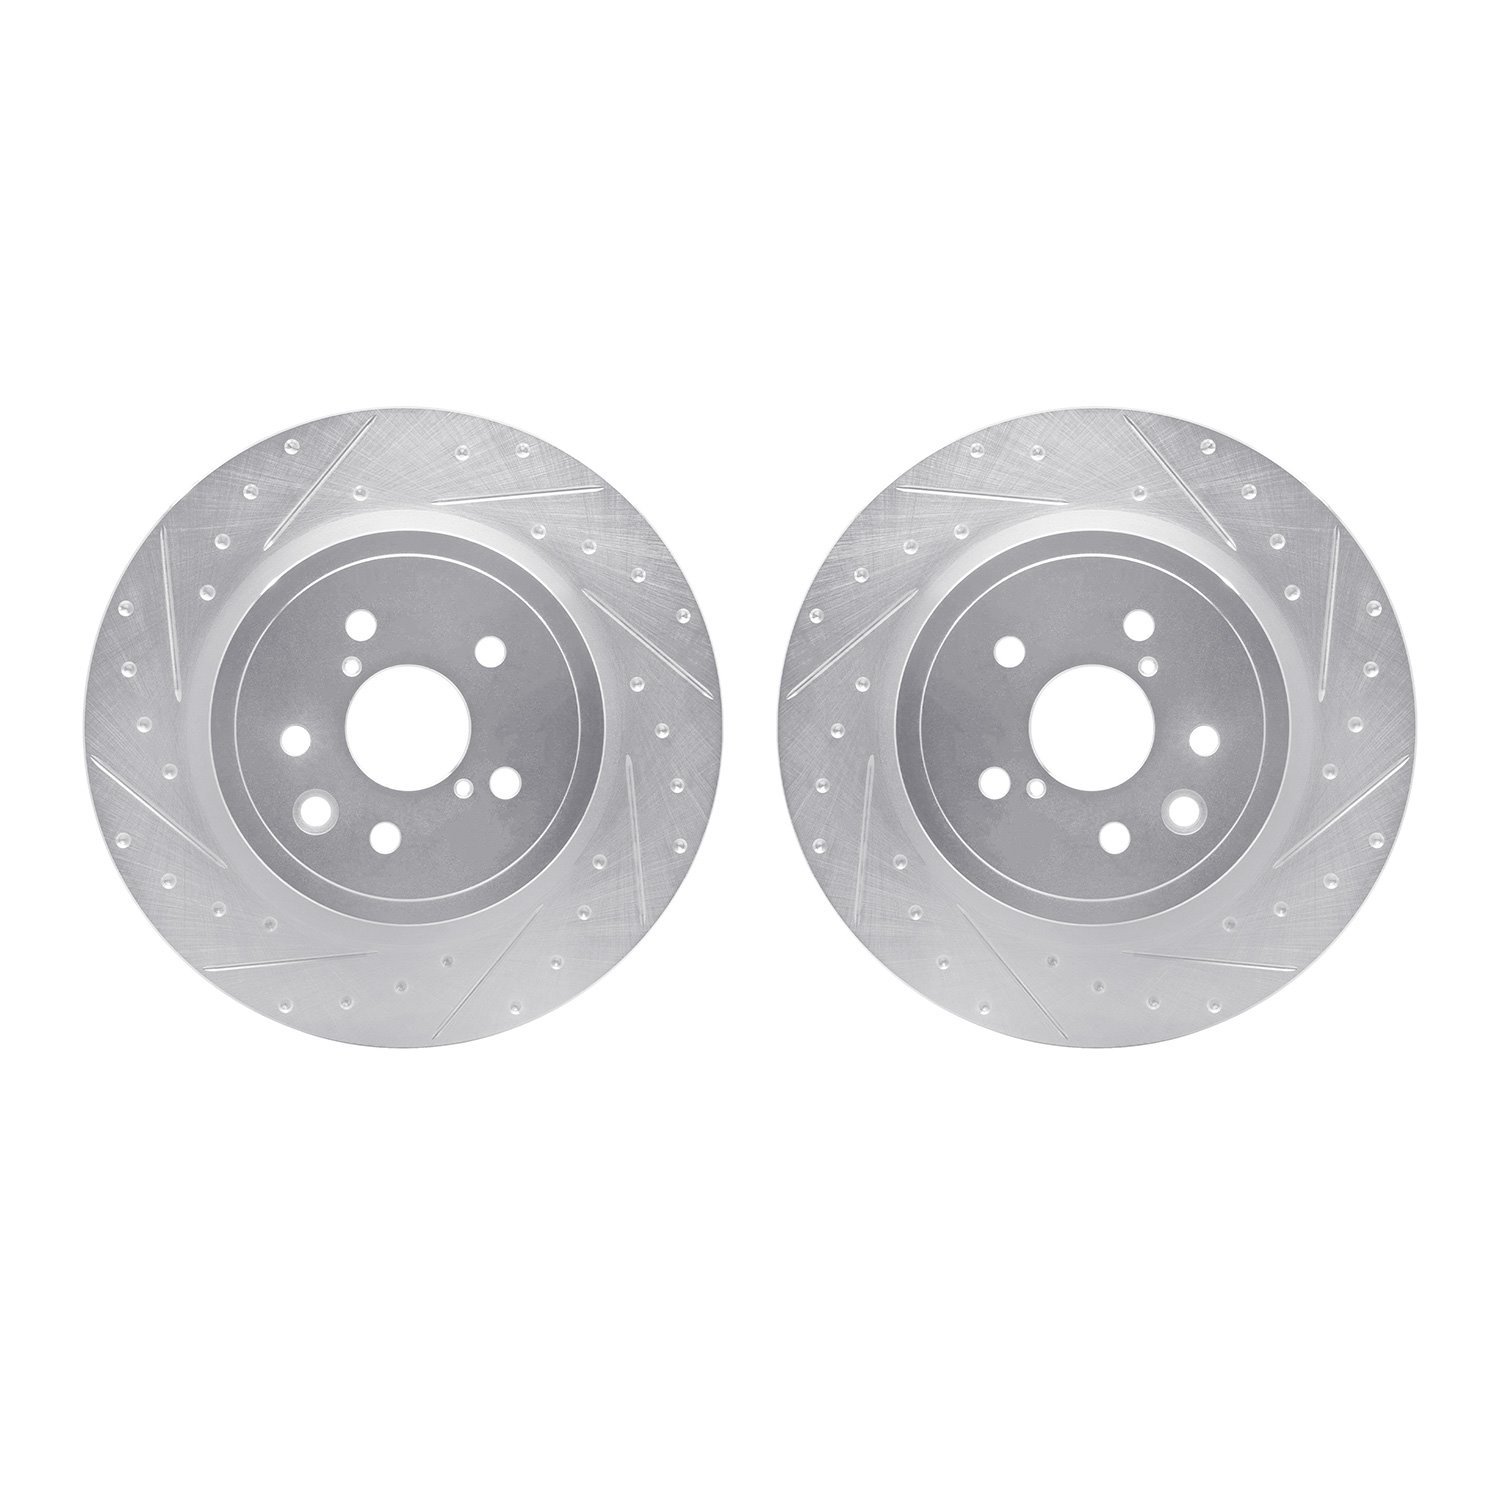 7002-75022 Drilled/Slotted Brake Rotors [Silver], Fits Select Lexus/Toyota/Scion, Position: Rear